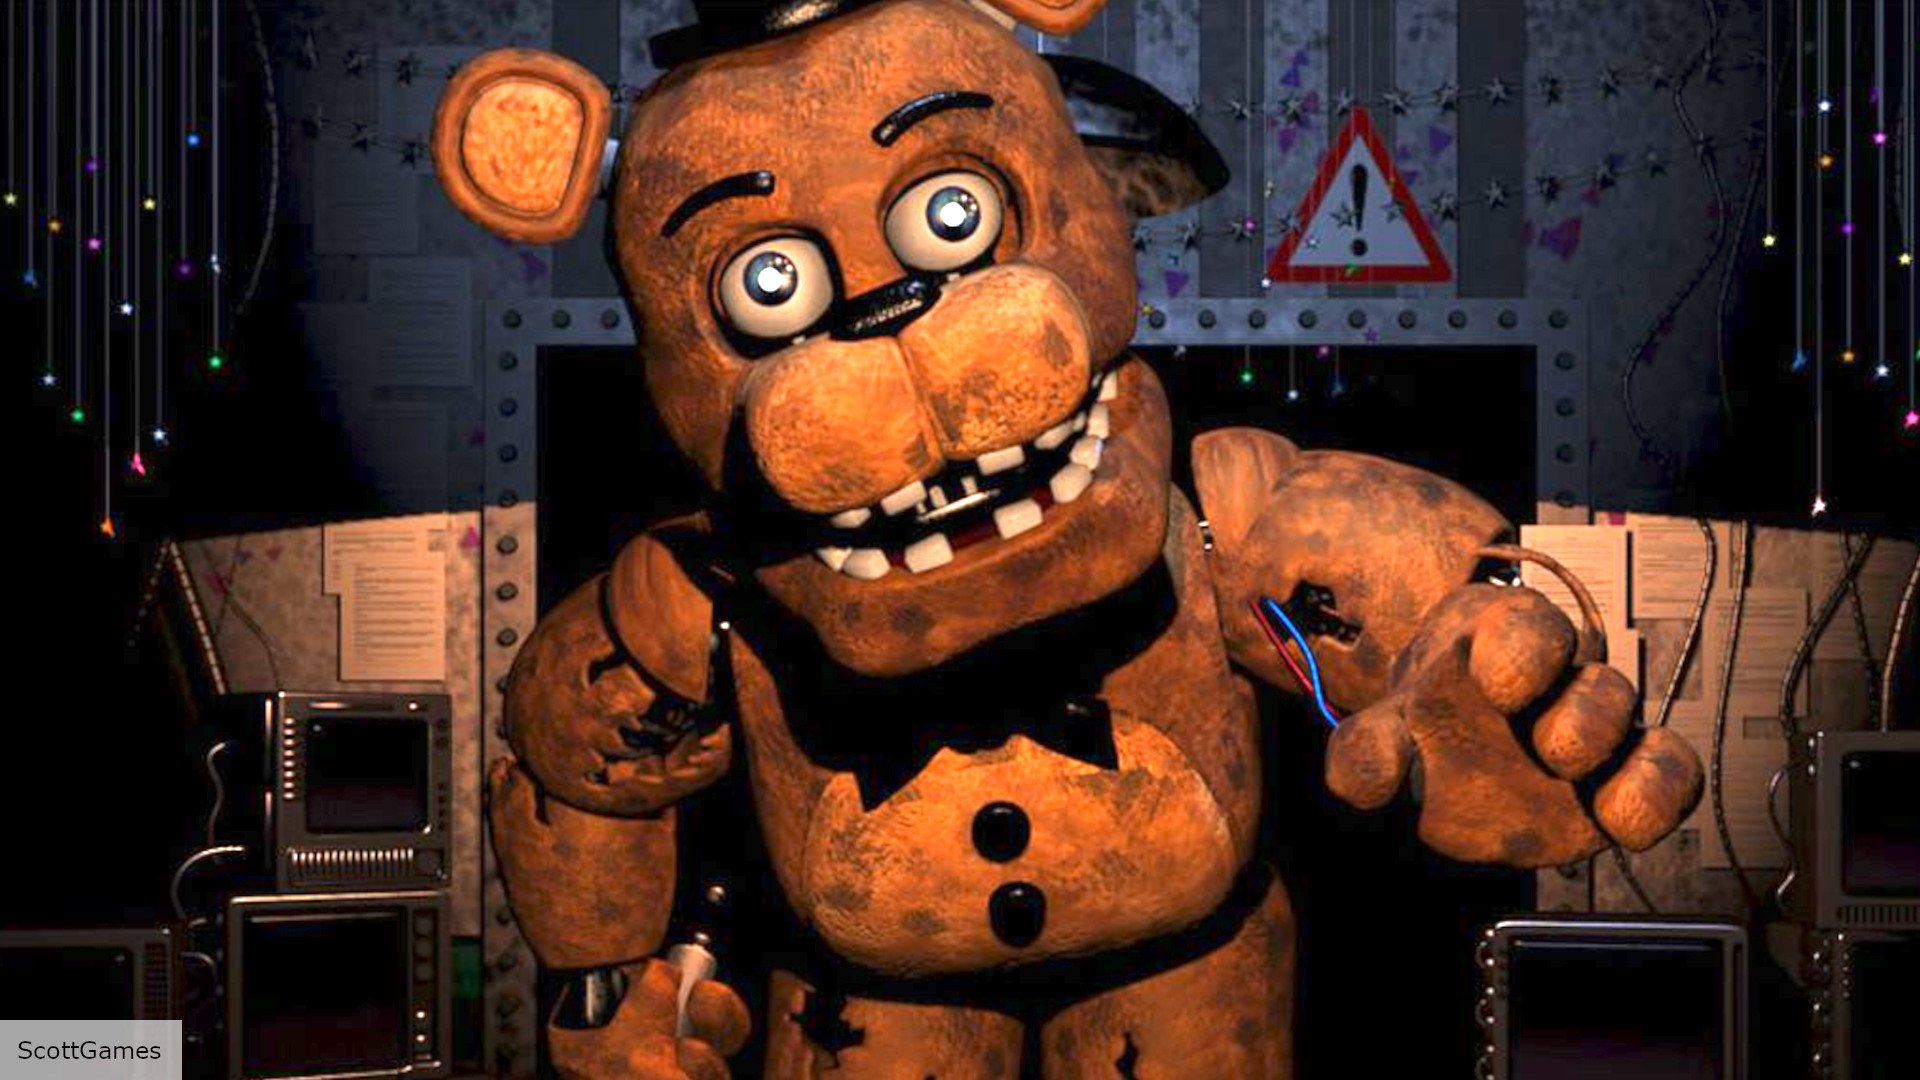 Why is the FNAF movie taking so long?